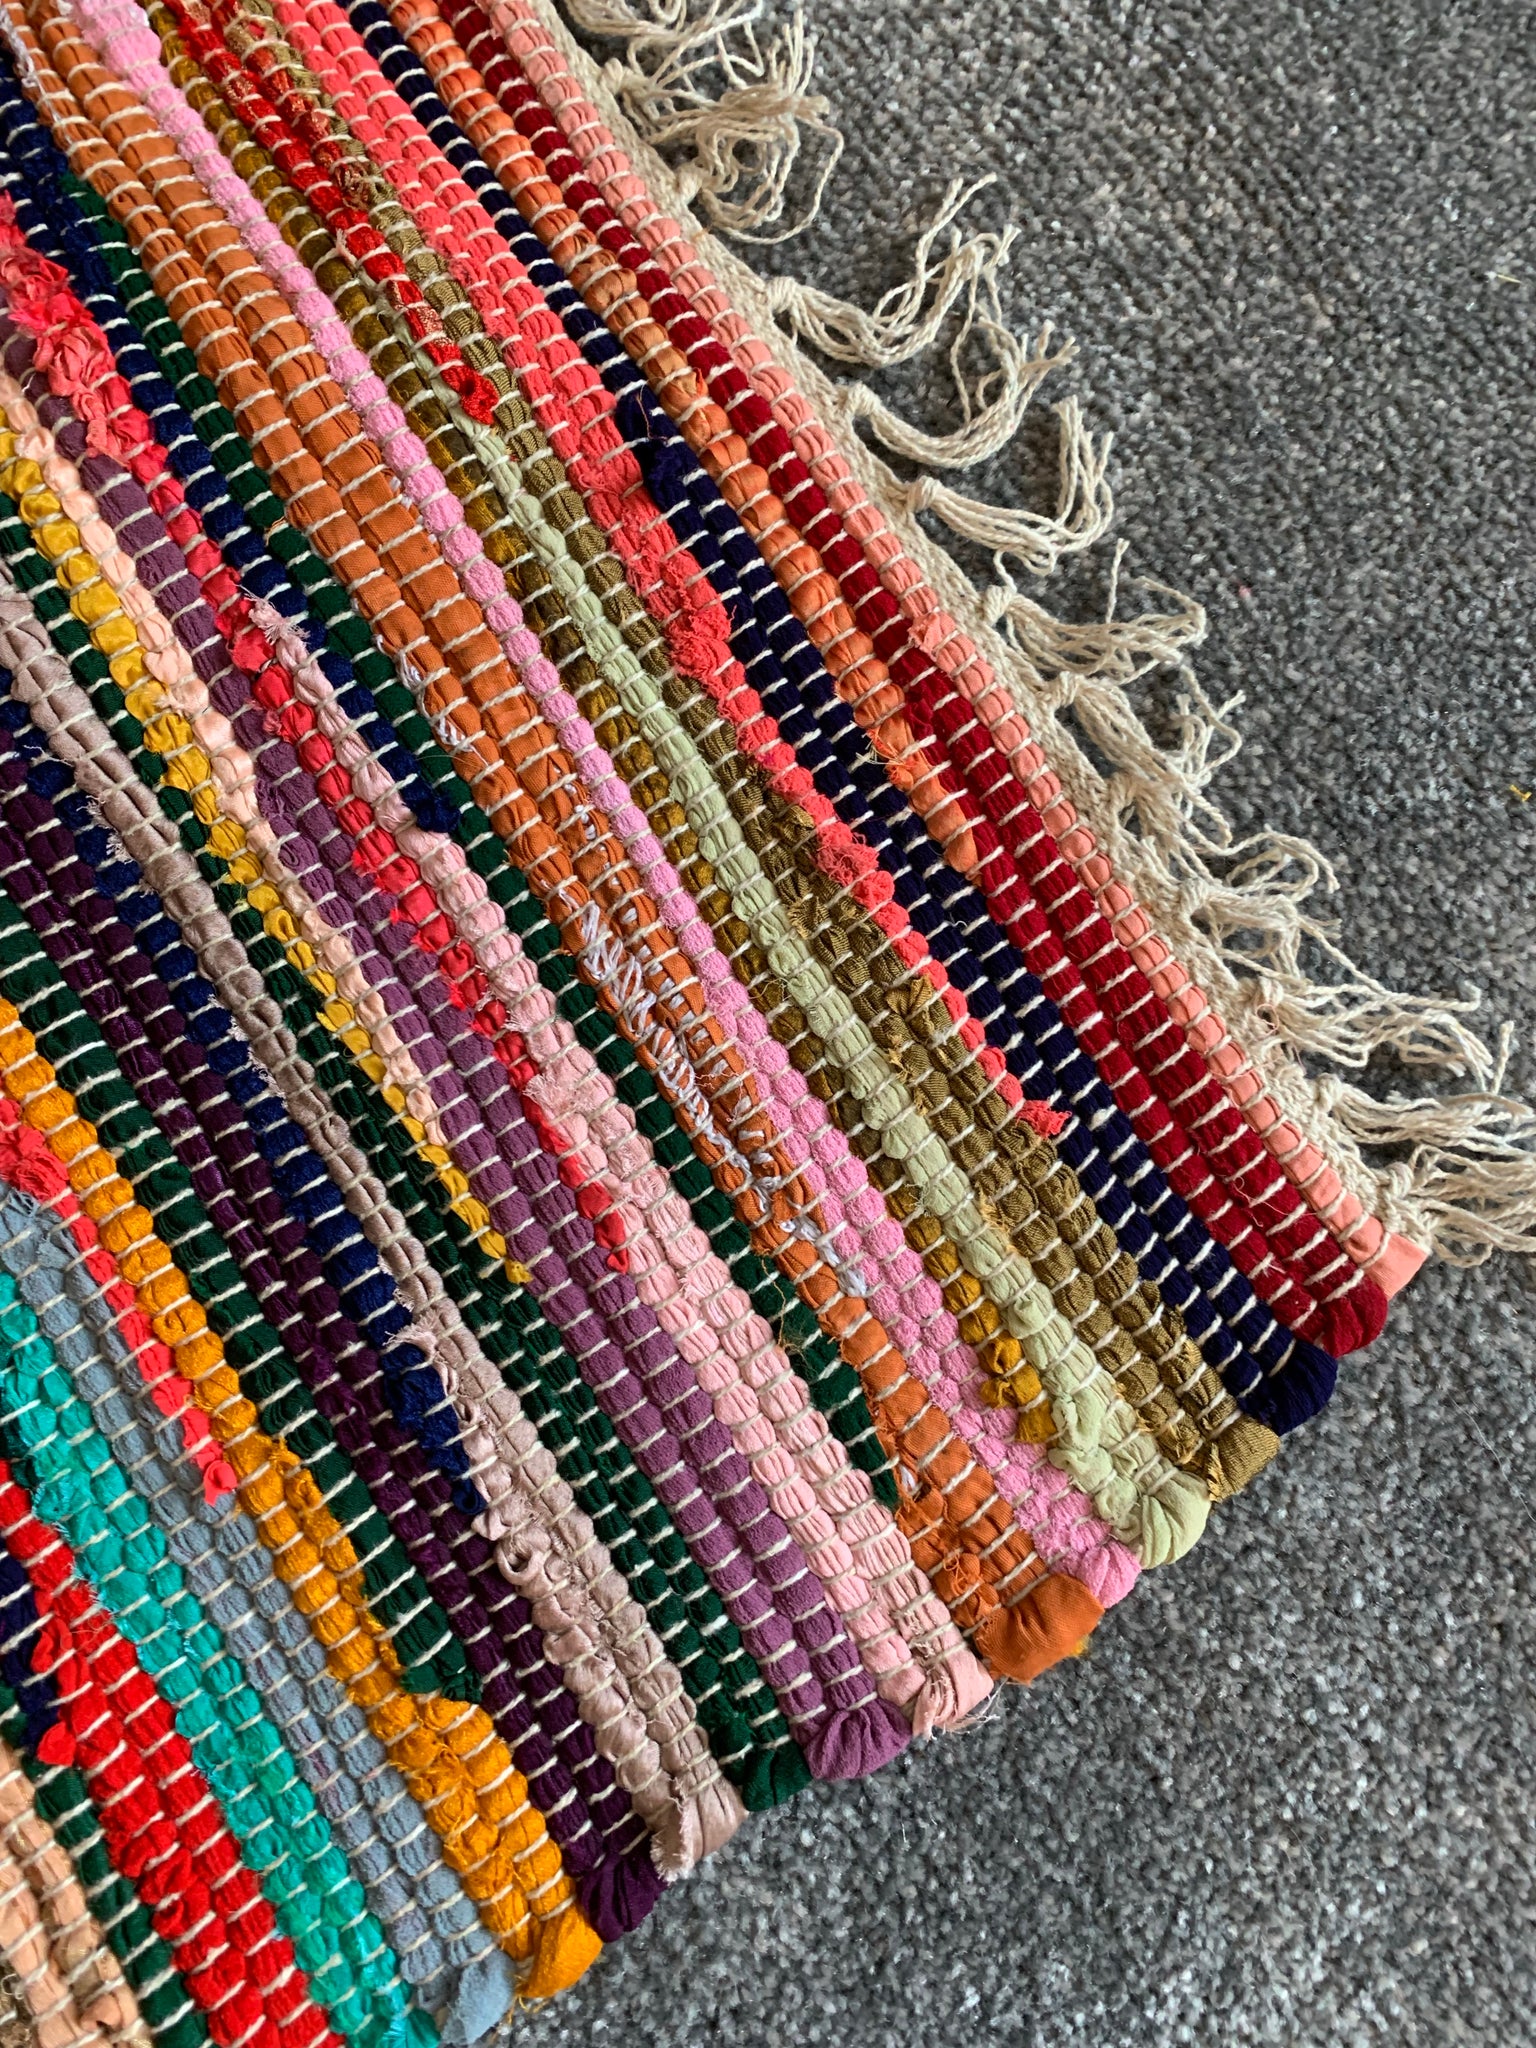 Rainbow Rag Rug made from recycled materials